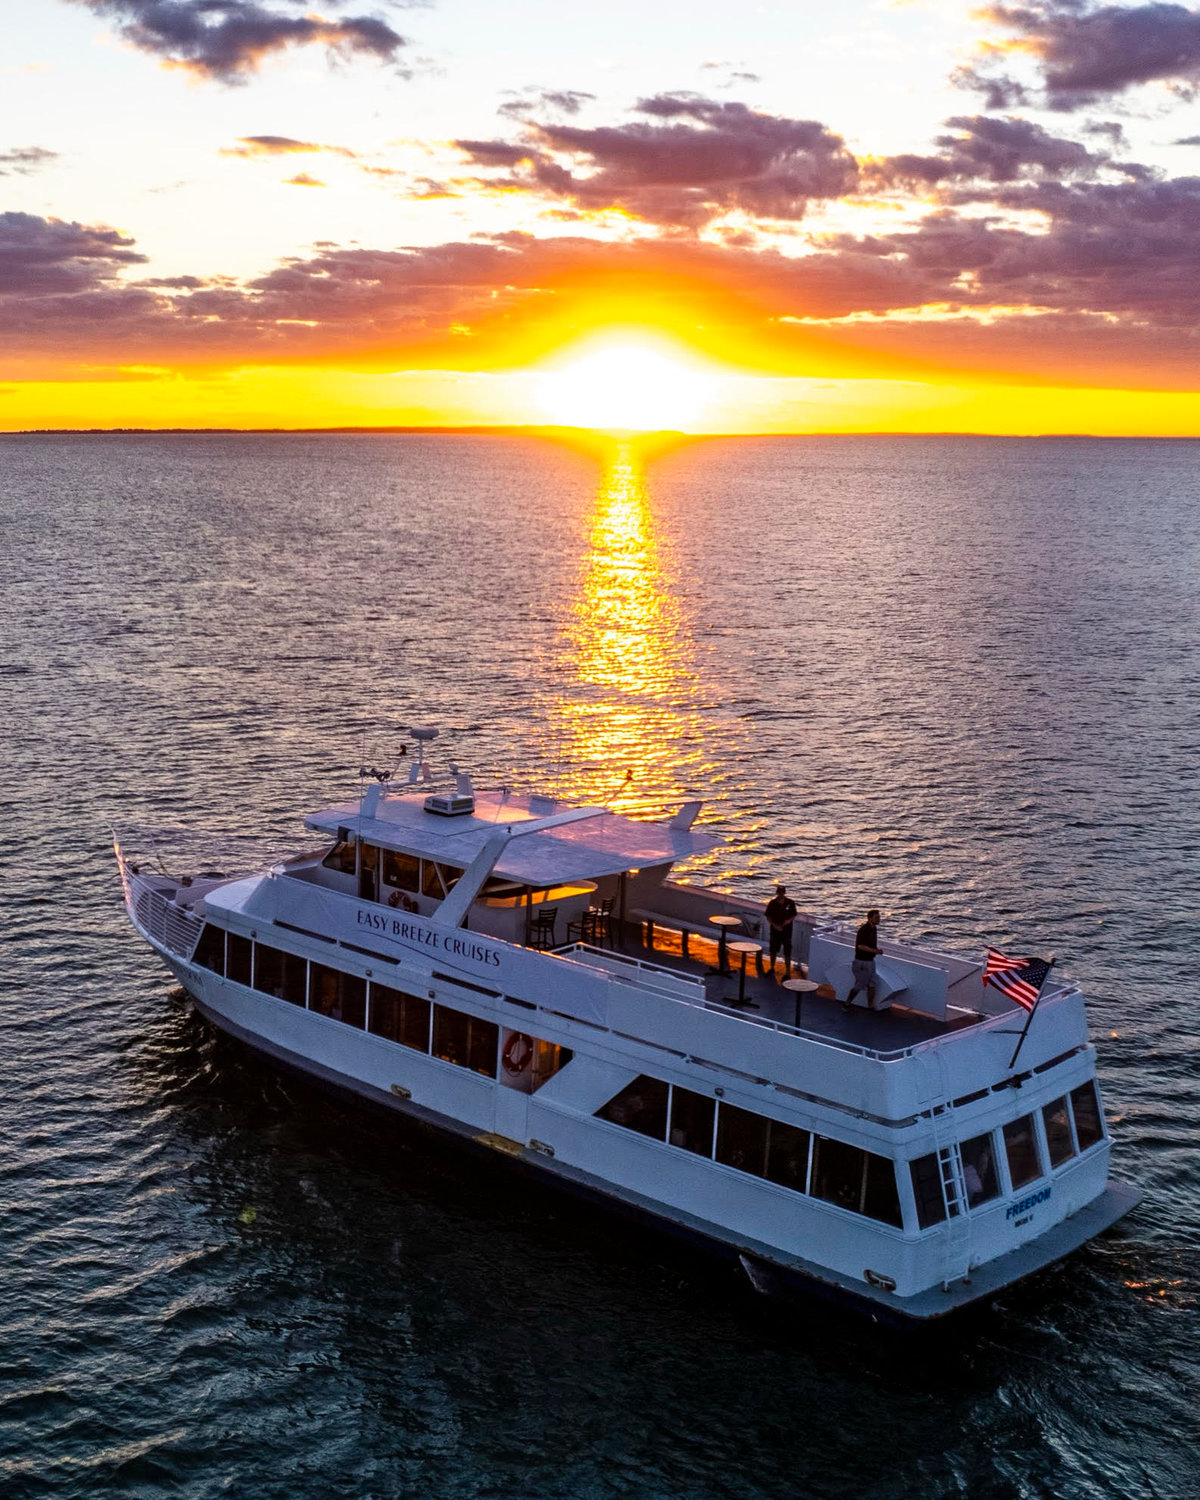 The Freedom from Easy Breeze sets sail from Montauk and offers breathtaking views.